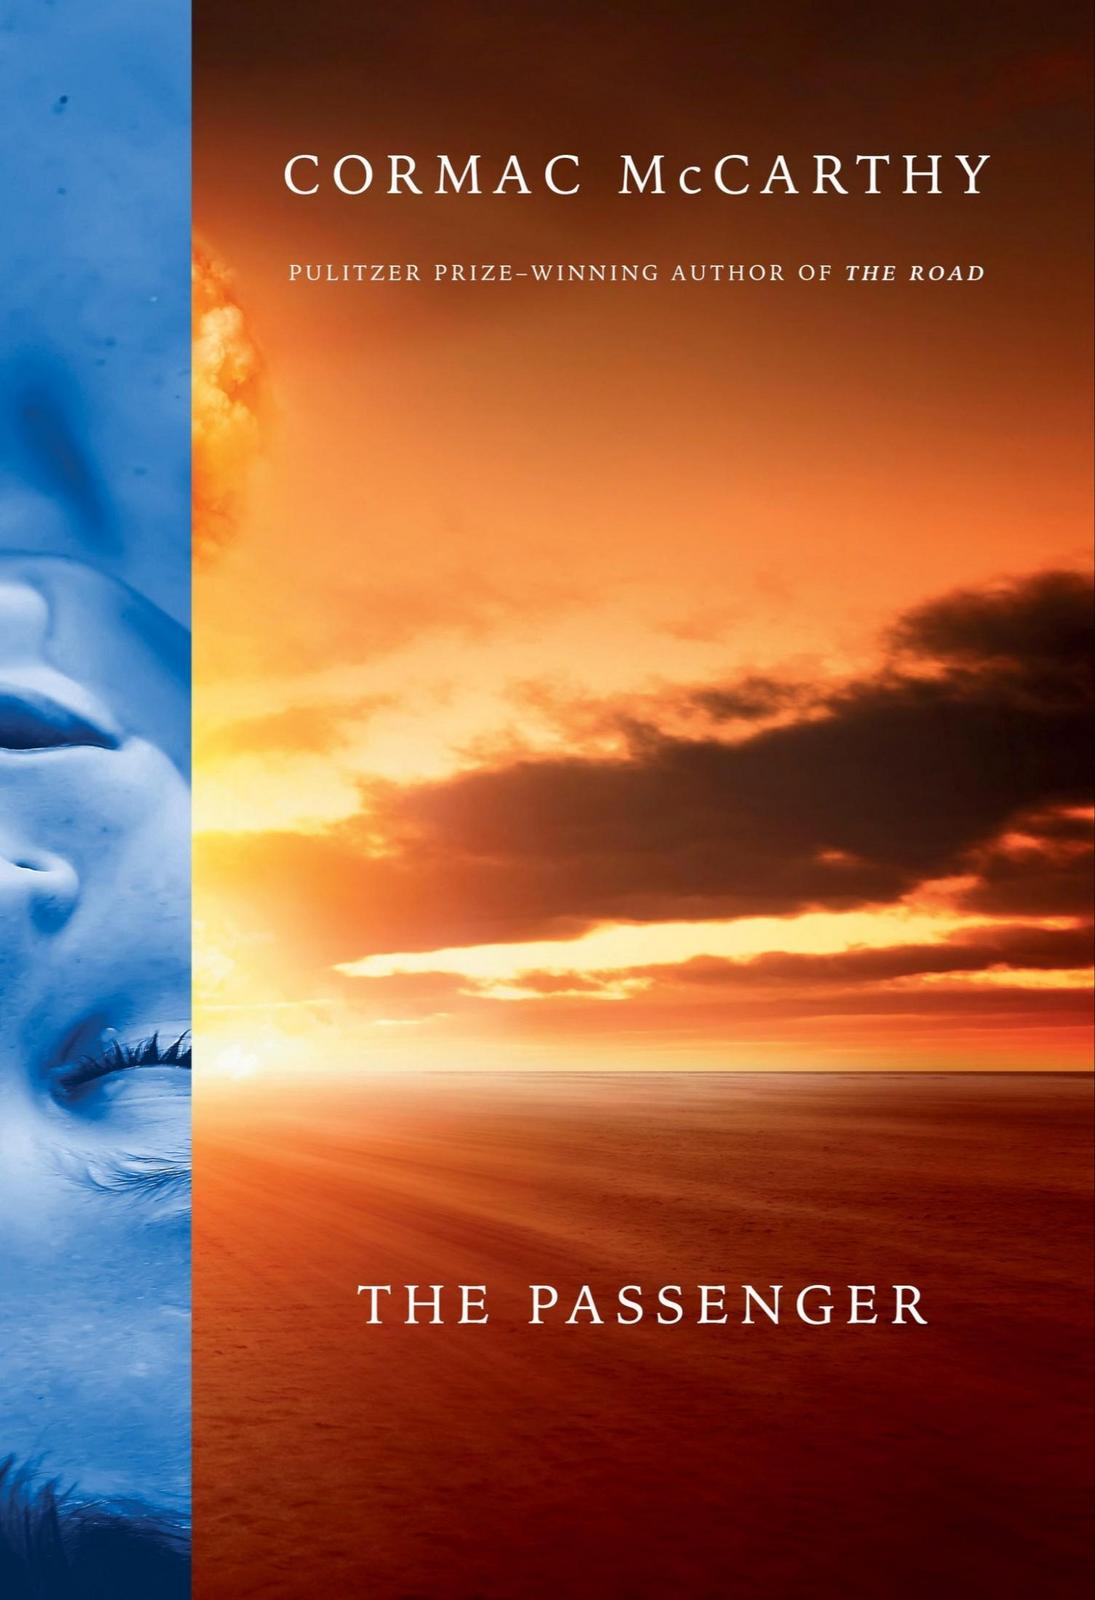 The Passenger (Alfred A. Knopf)